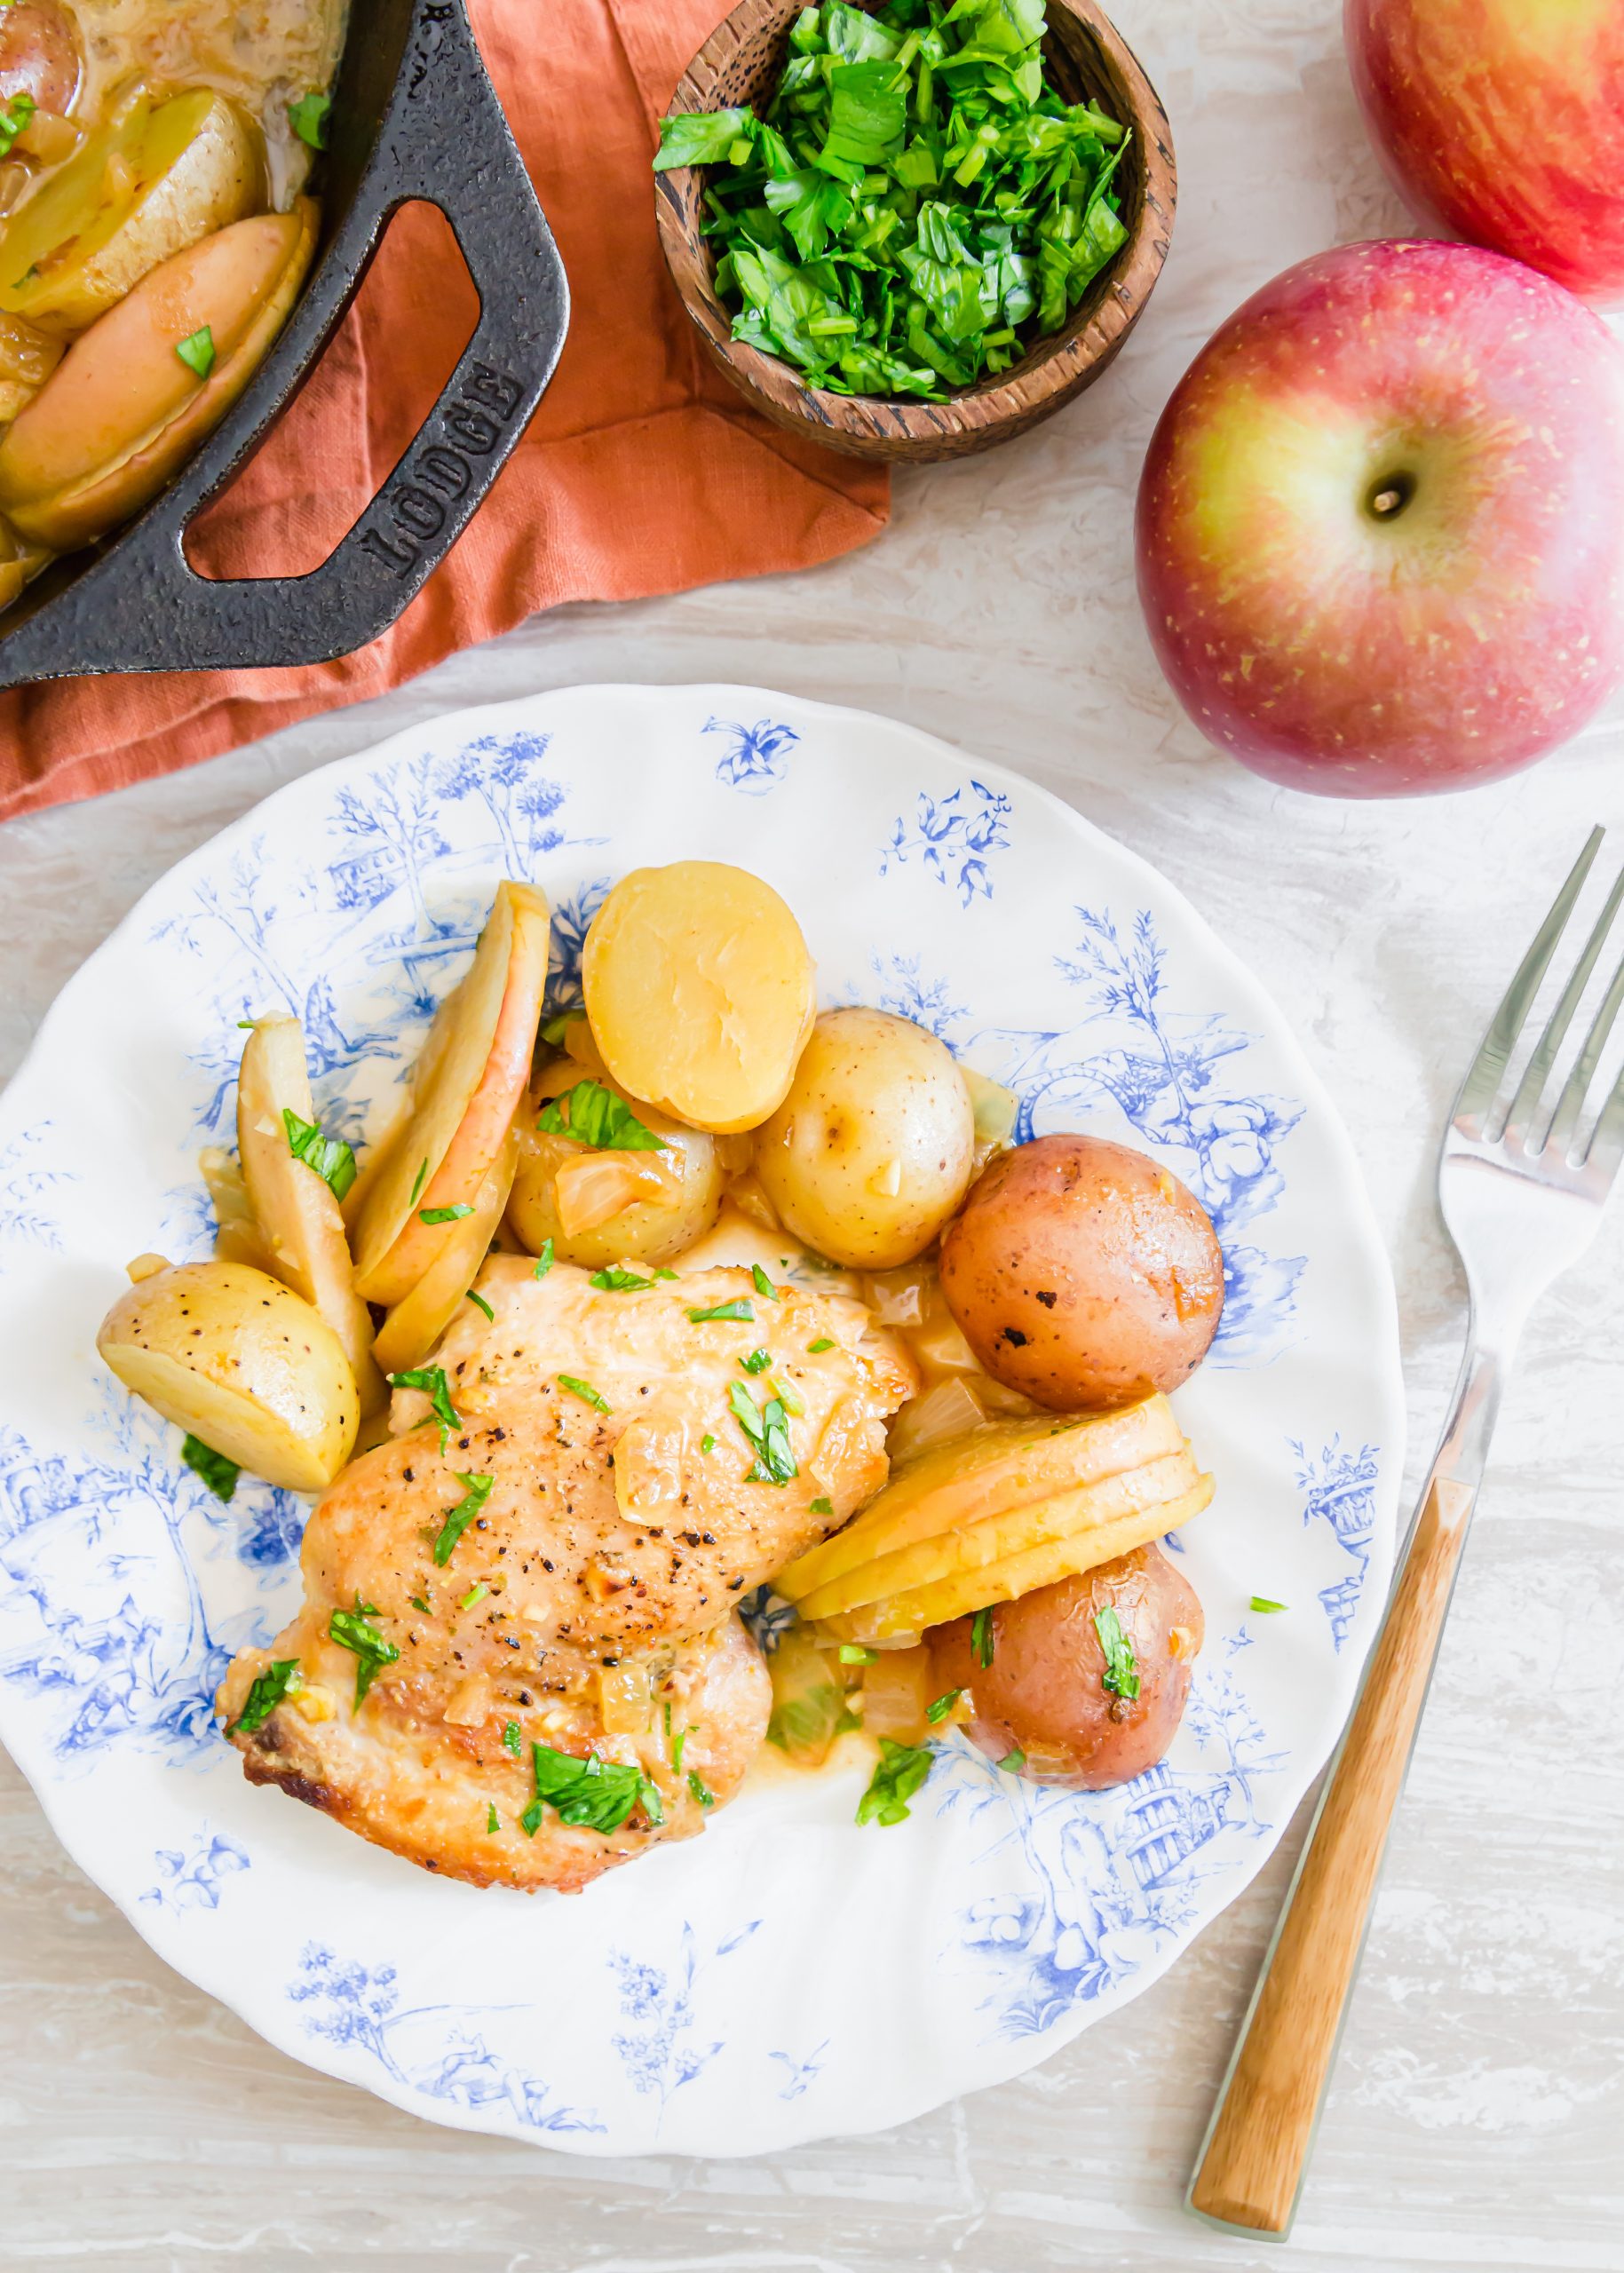 picture of chicken thigh, potatoes, apple slices in a mustard sauce on a plate 